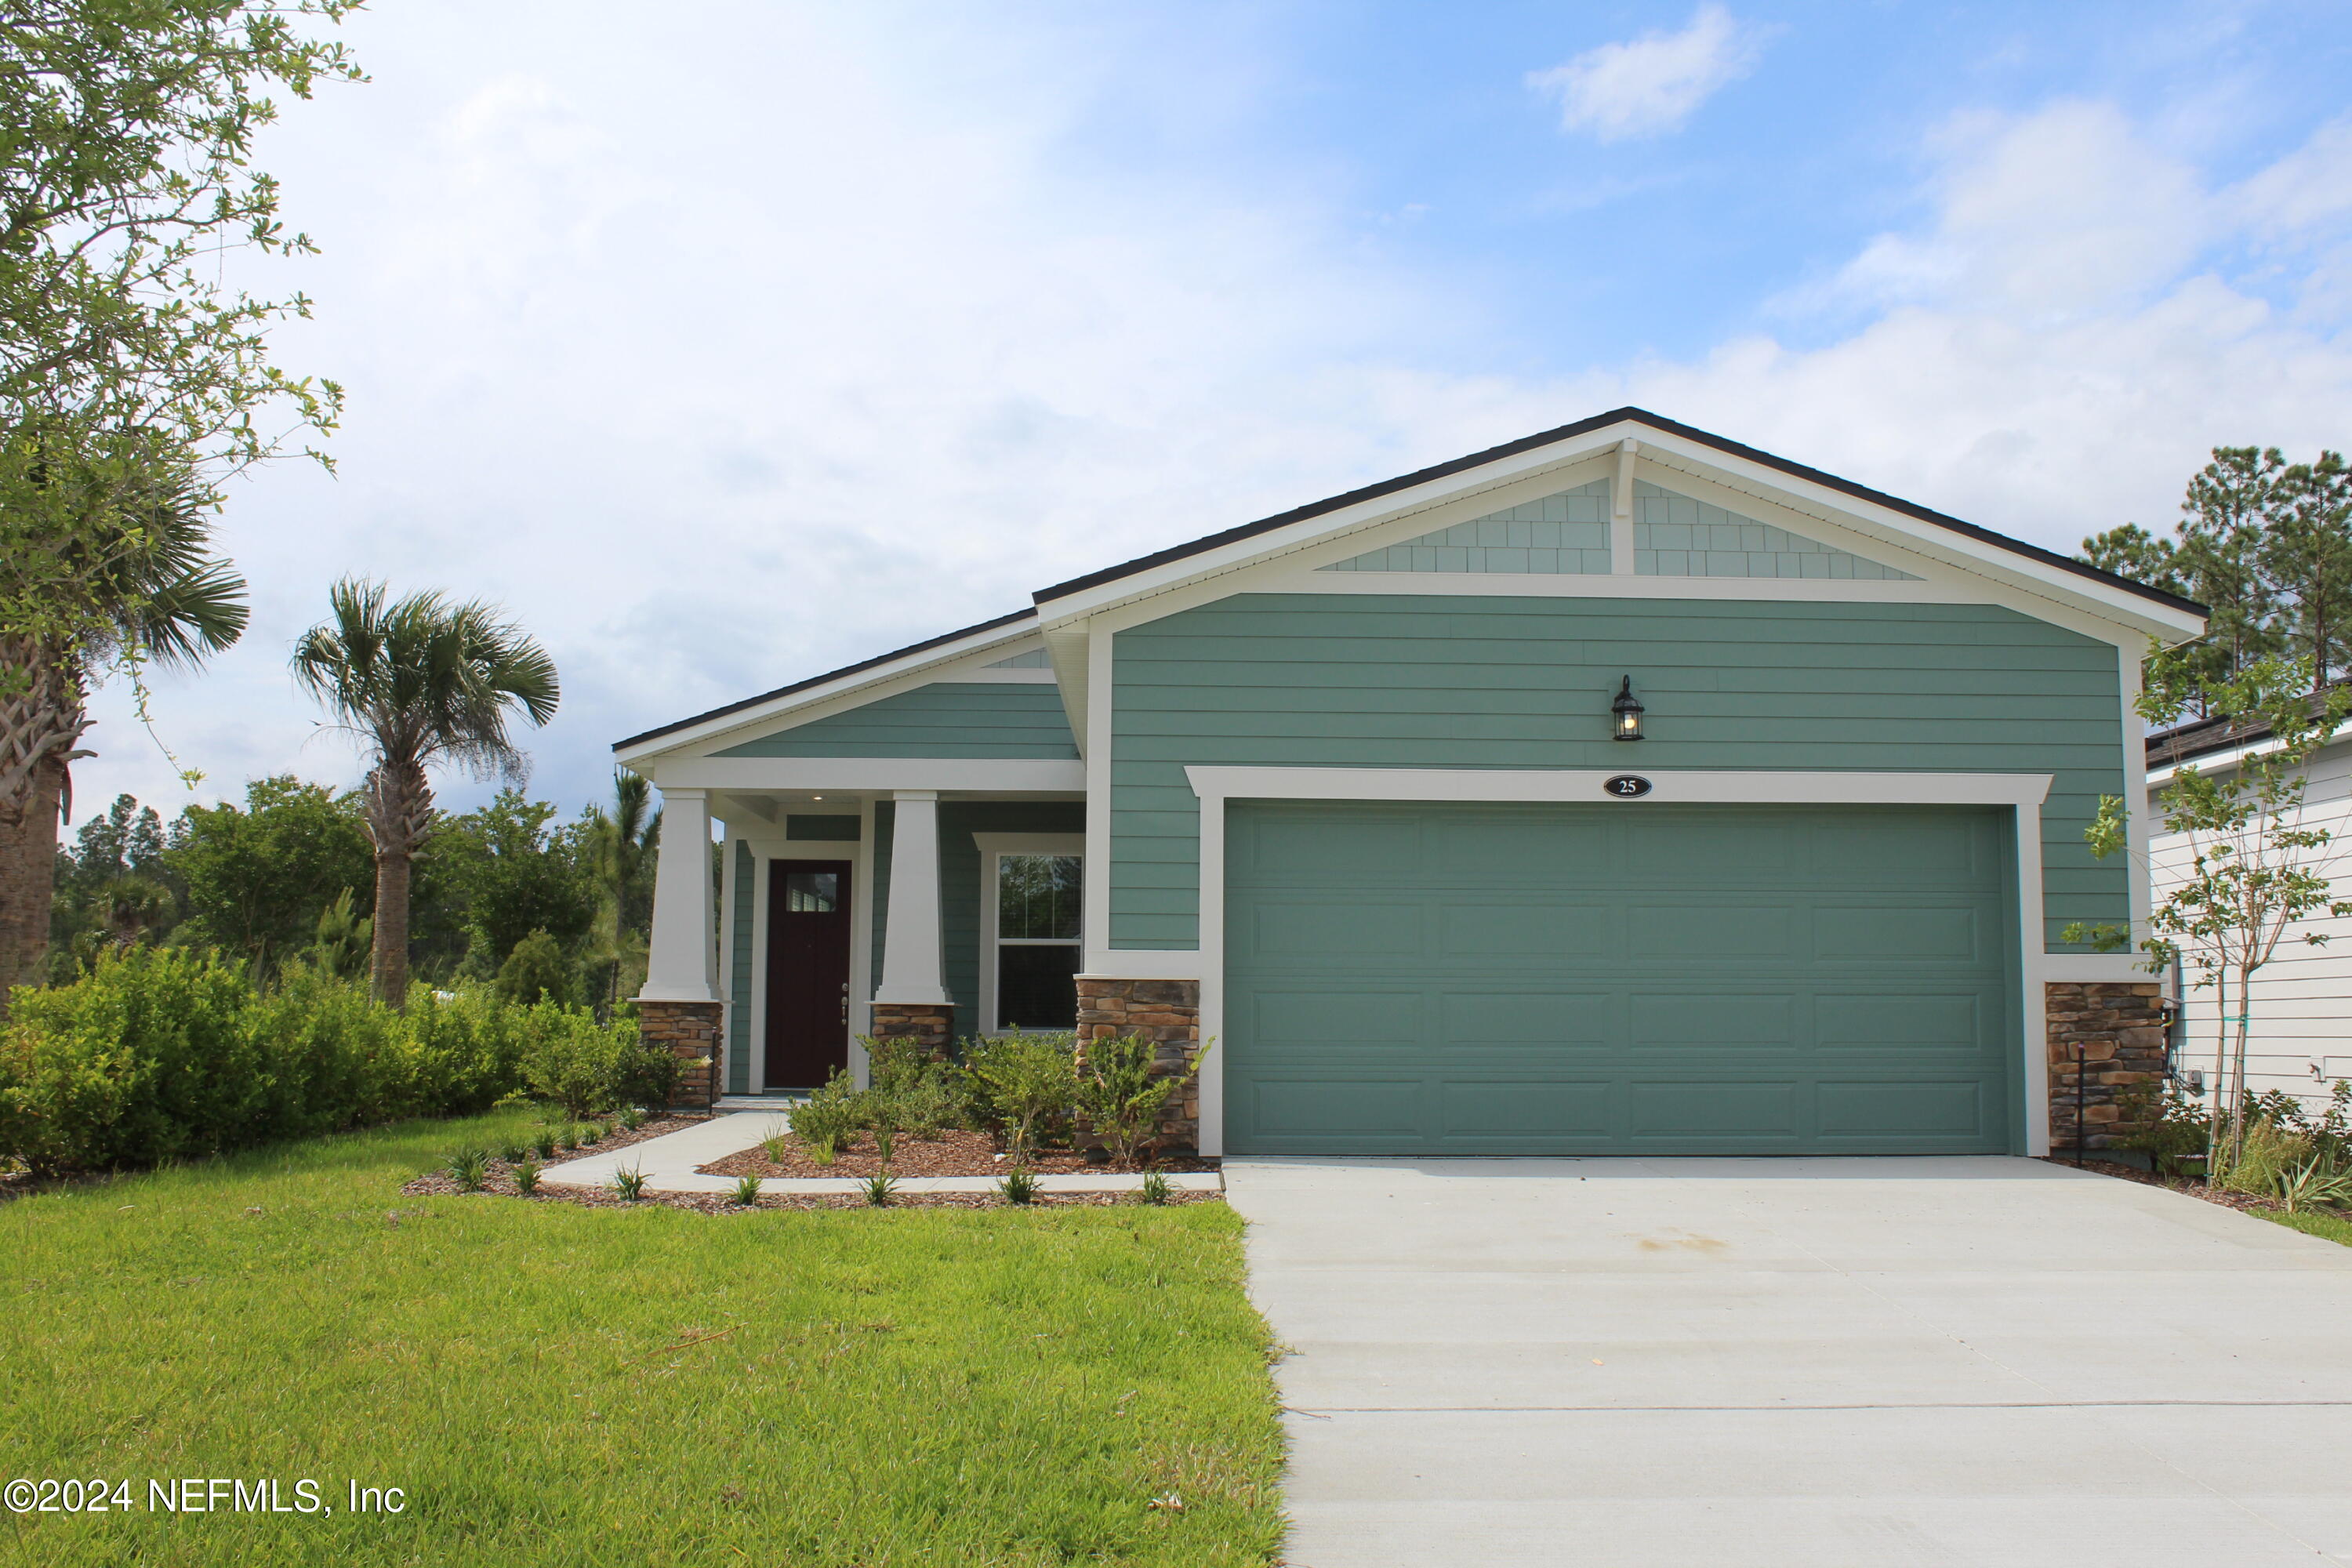 St Johns, FL home for sale located at 25 Pigeon Cove, St Johns, FL 32259